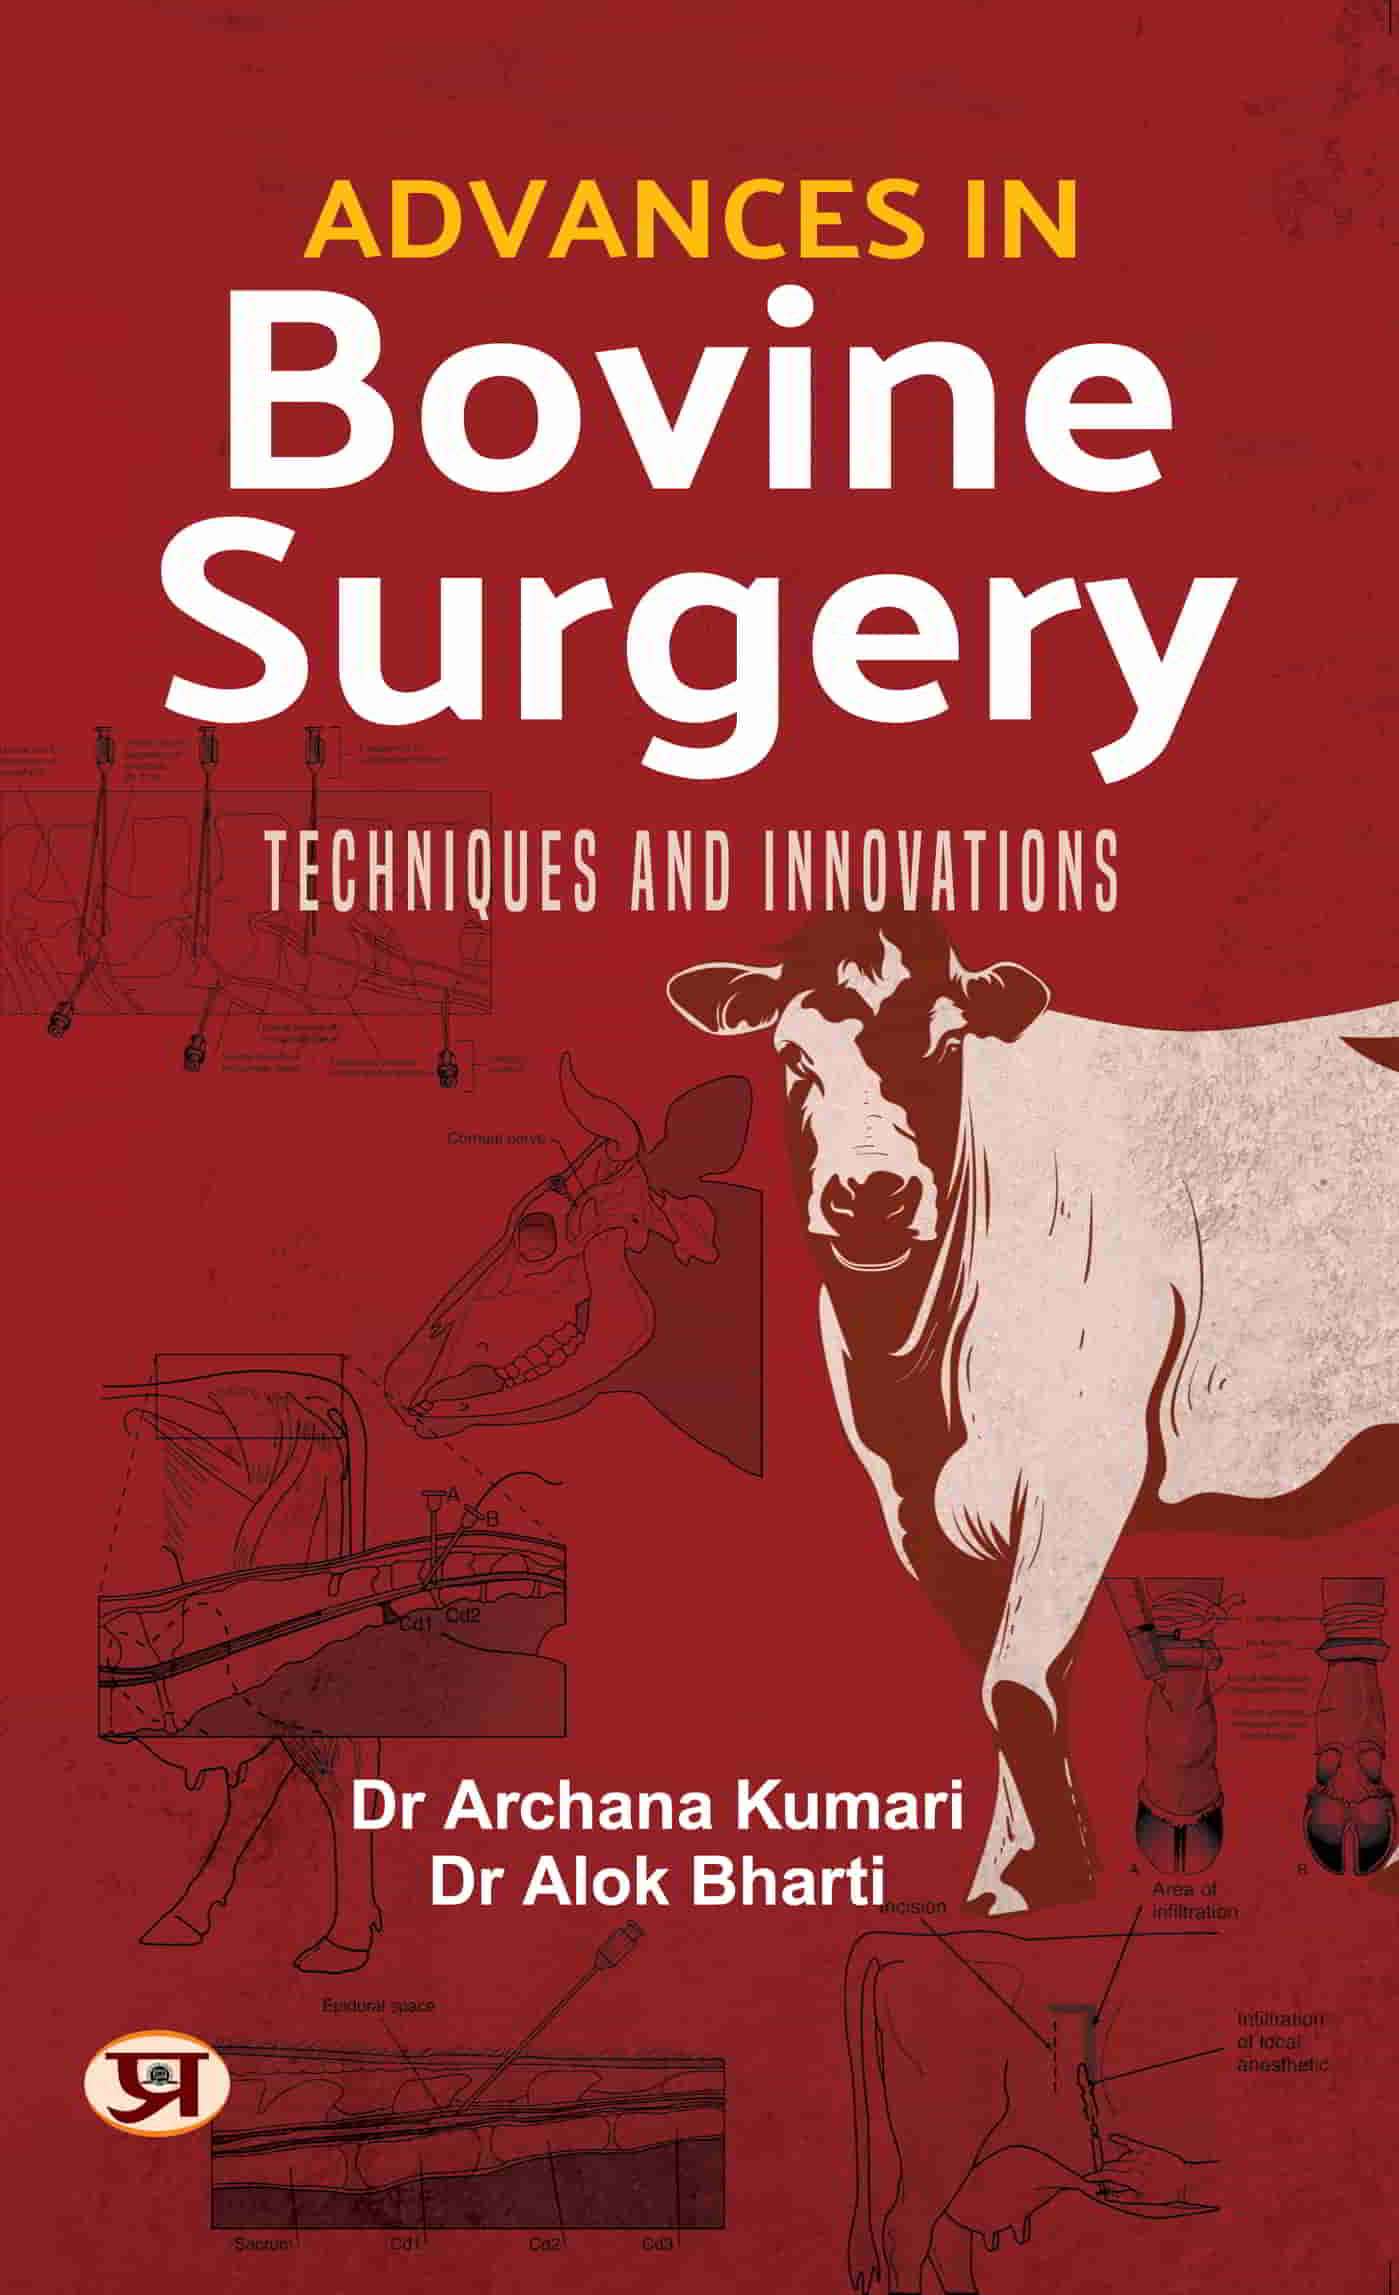 Advances in Bovine Surgery: Techniques and Innovations